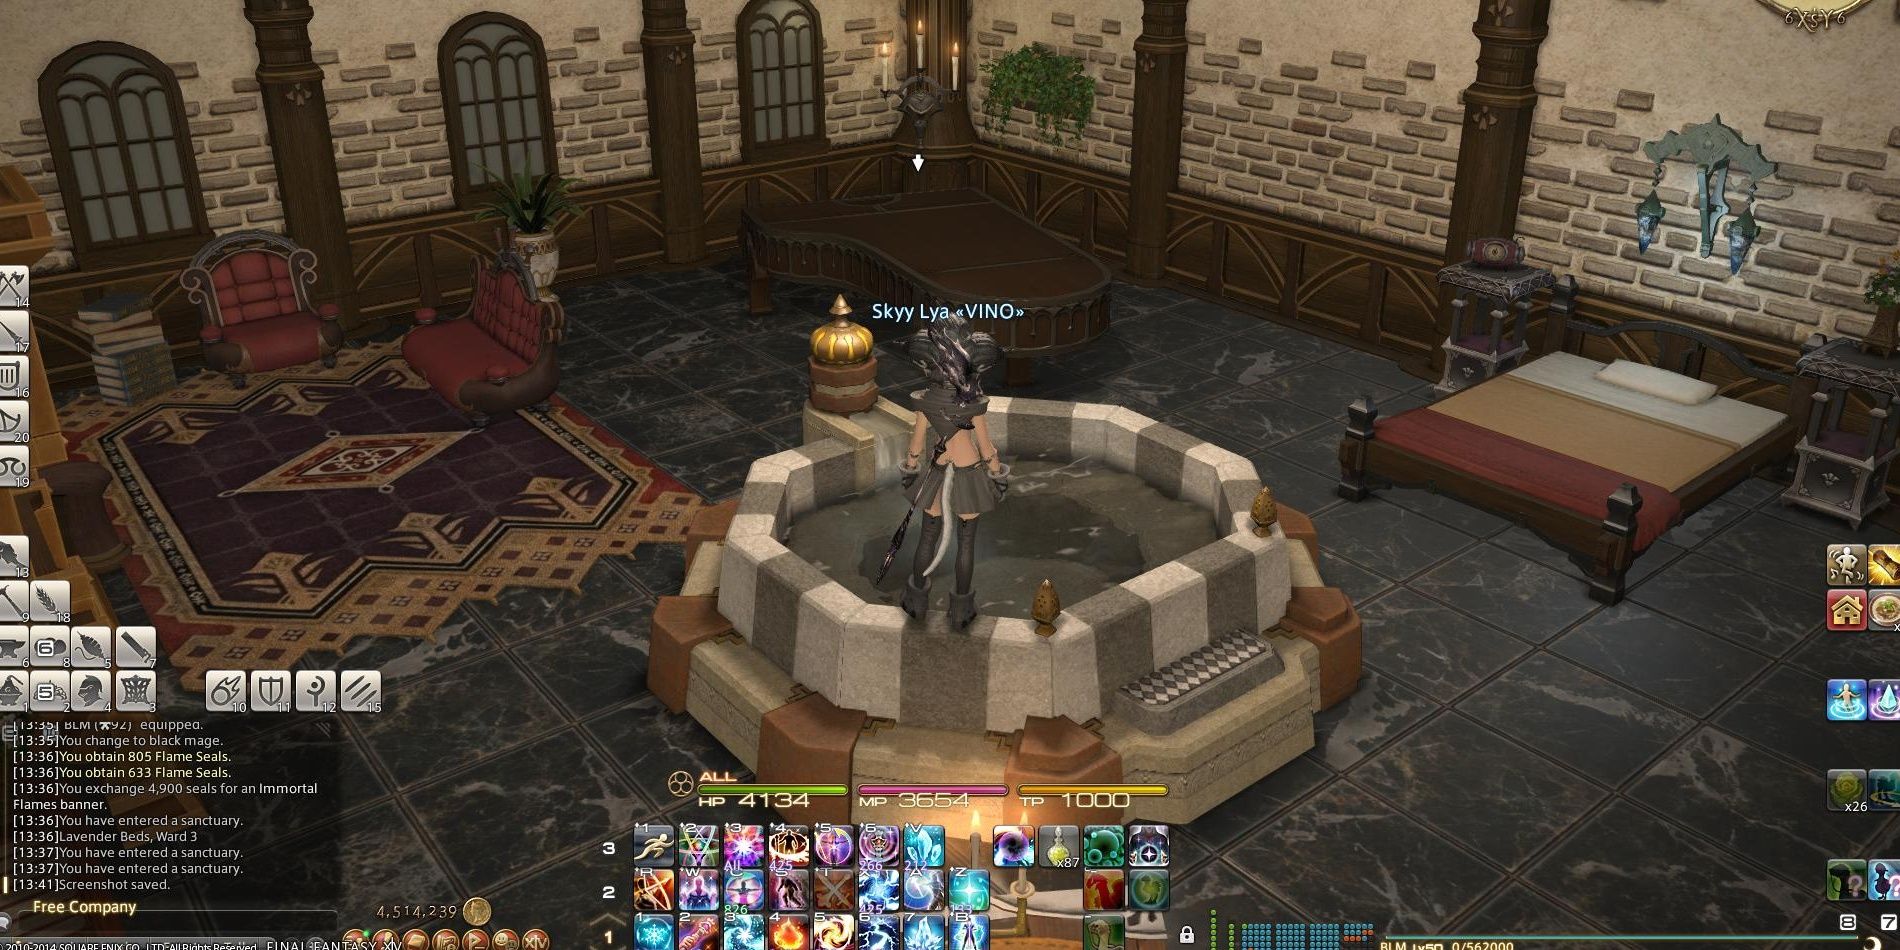 The player reaches a sanctuary in Final Fantasy XIV